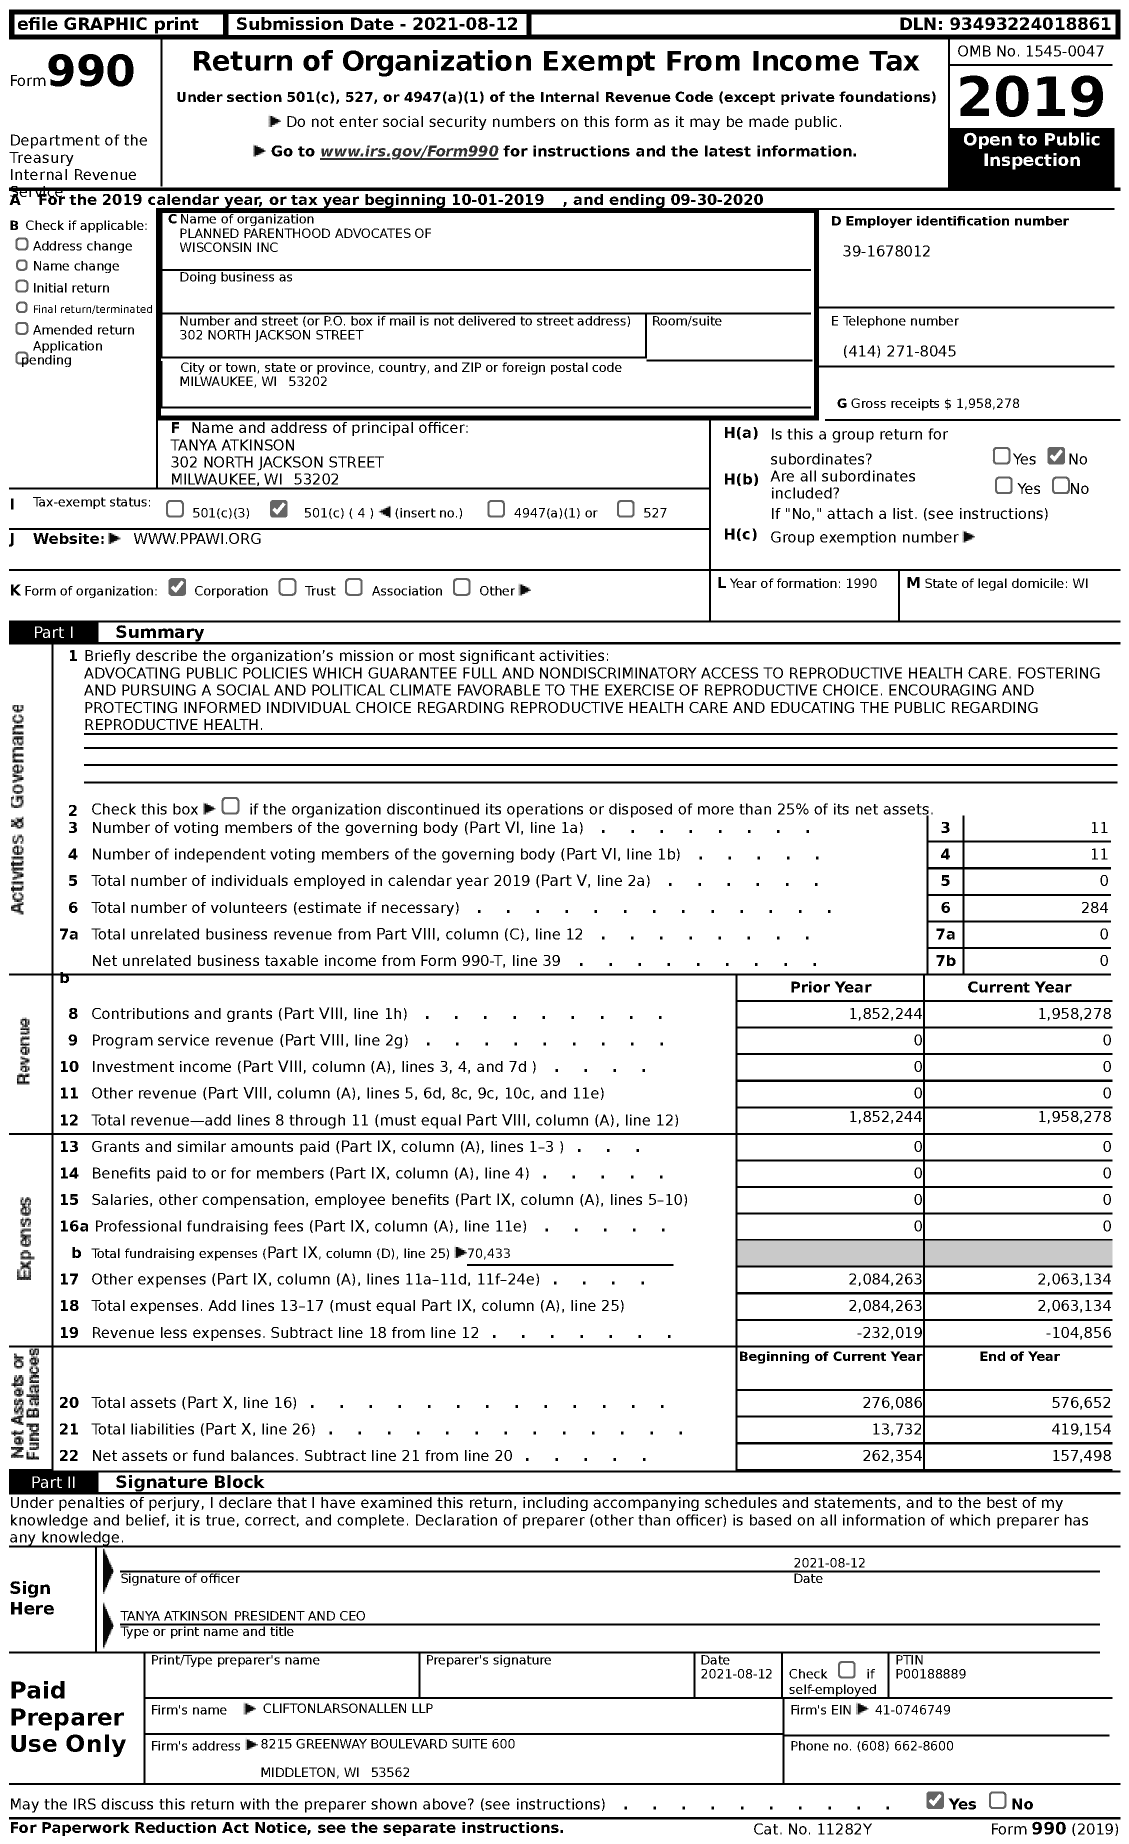 Image of first page of 2019 Form 990 for Planned Parenthood Advocates of Wisconsin